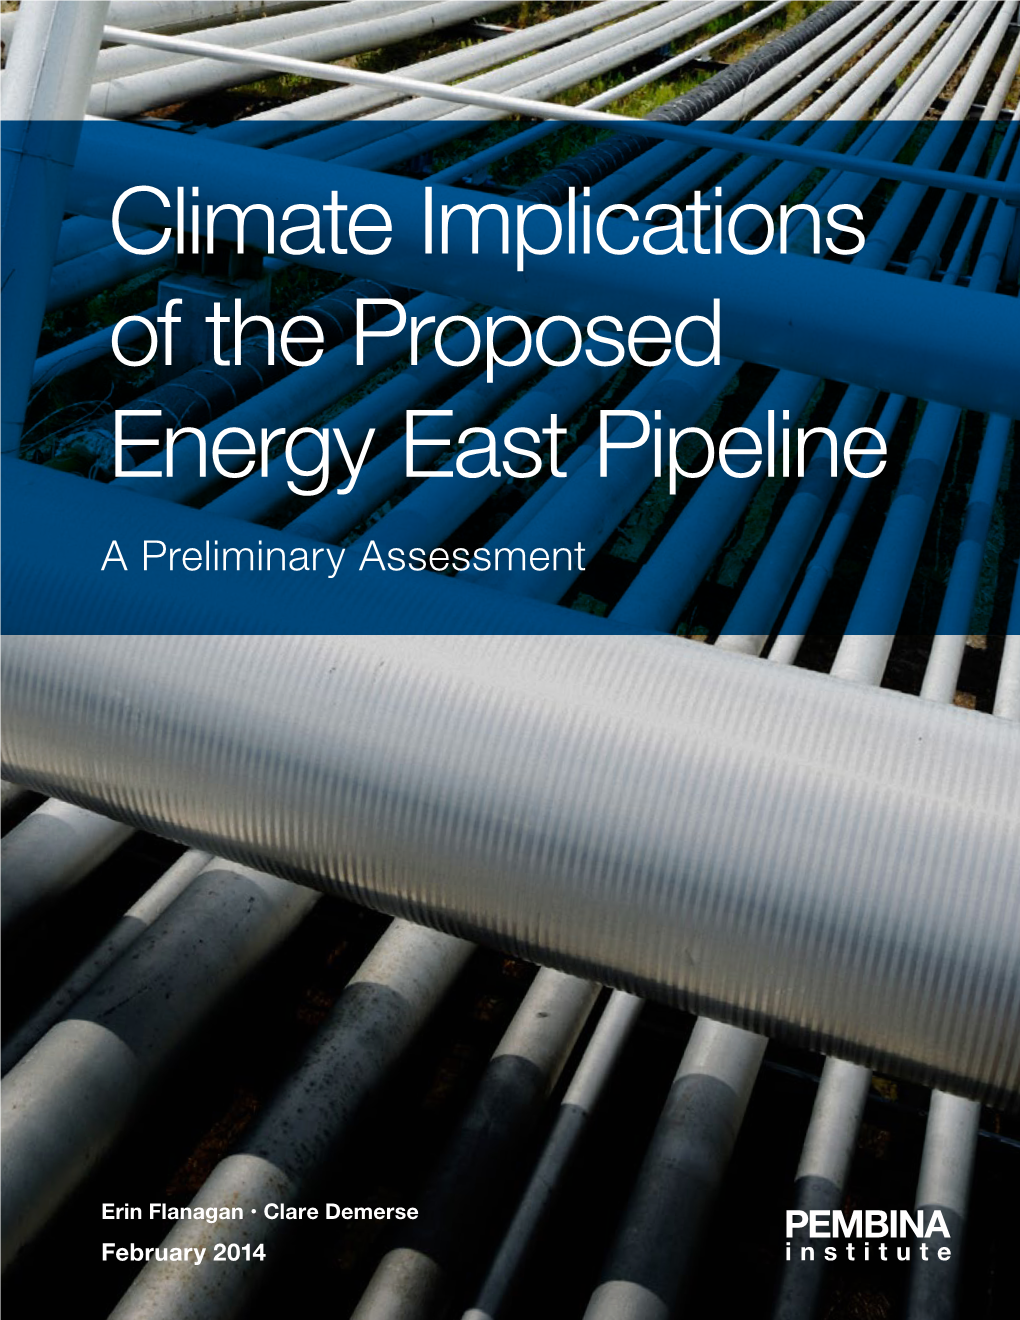 Energy East Pipeline a Preliminary Assessment